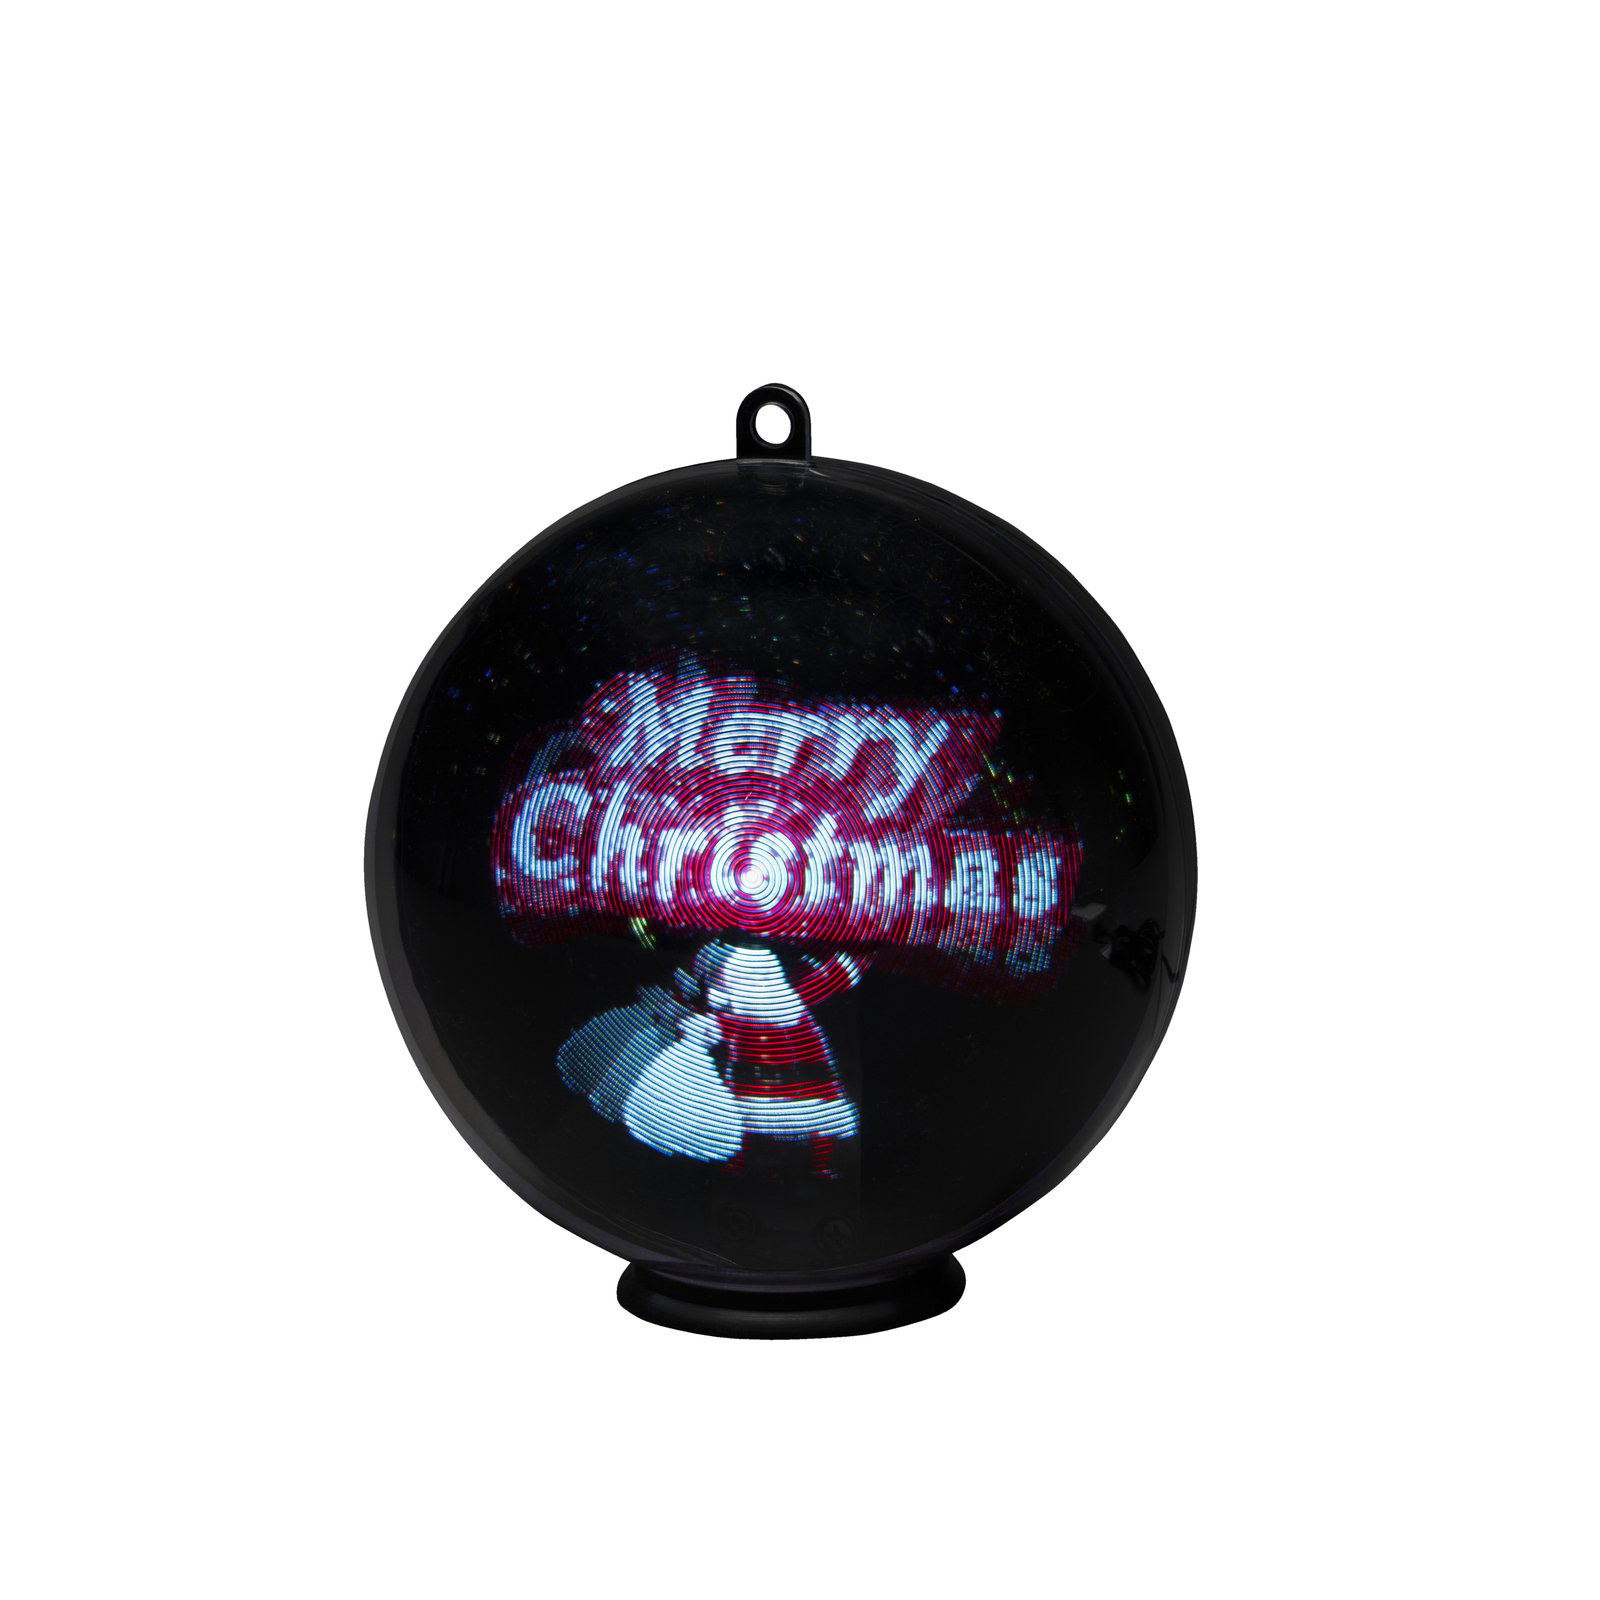 Boules hologramme 3D, Merry Christmas, 64 LED